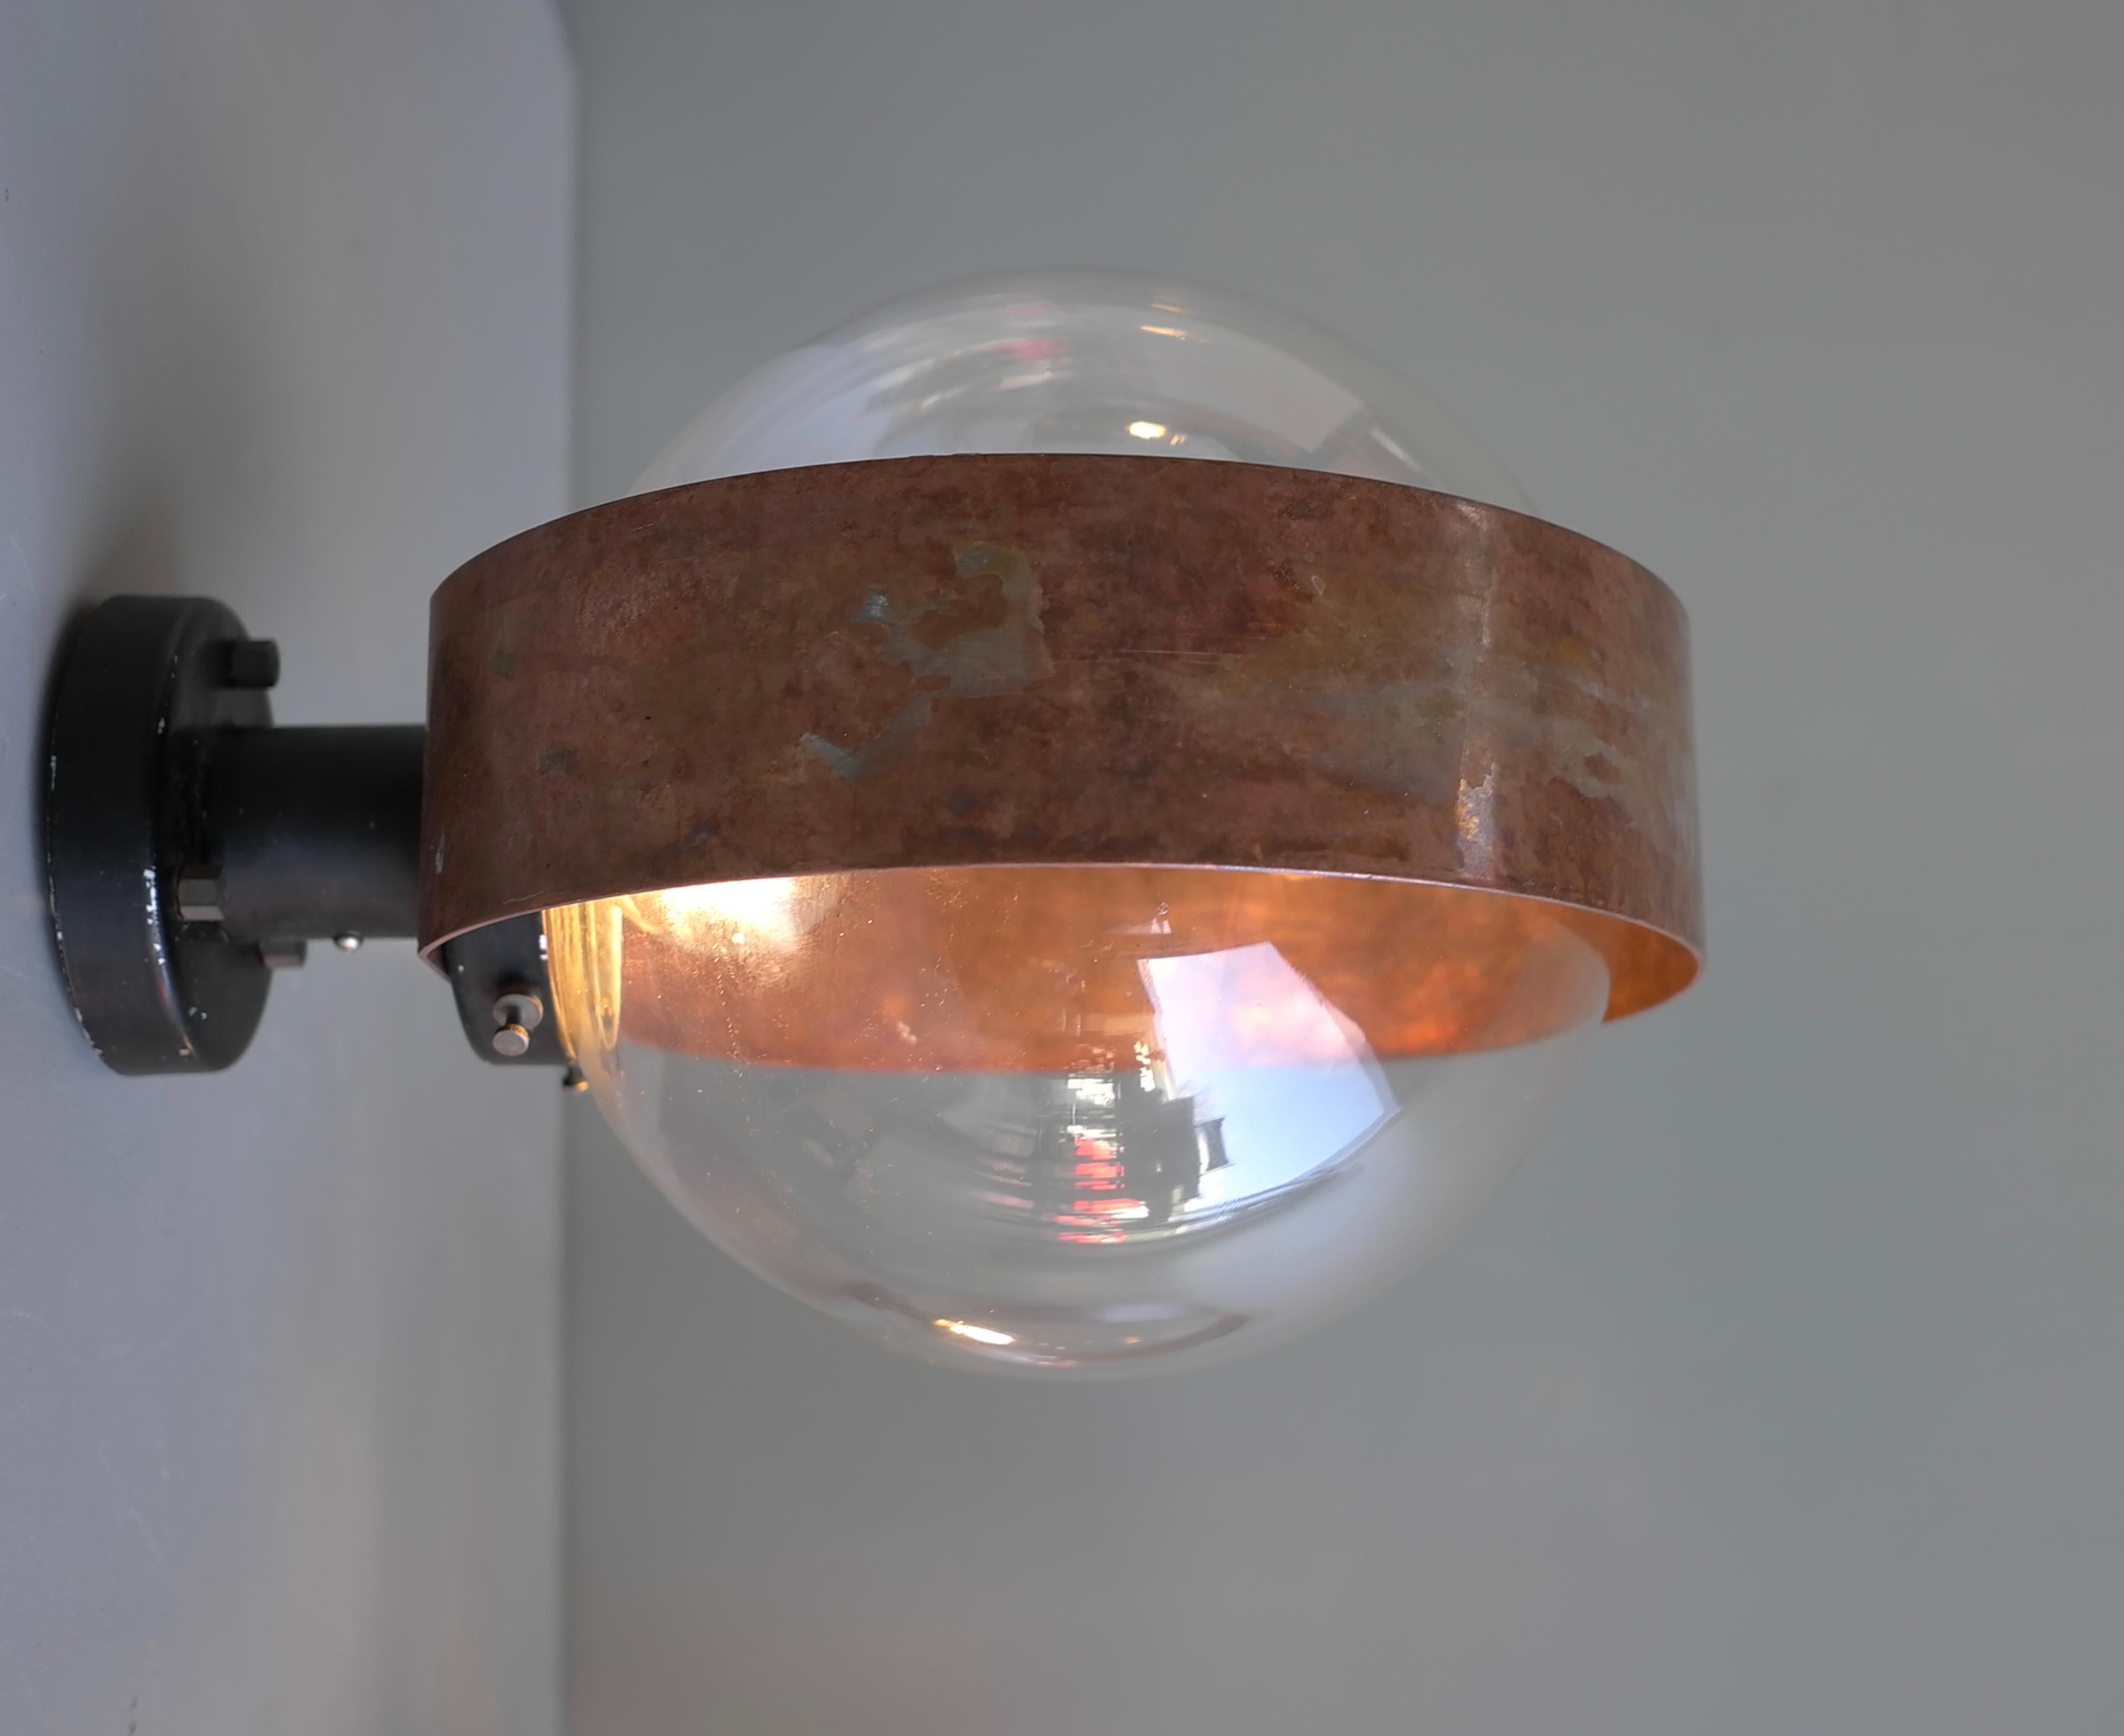 Pair of Scandinavian Glass Ball Wall lamps with Copper Patina Rims, 1960's For Sale 4